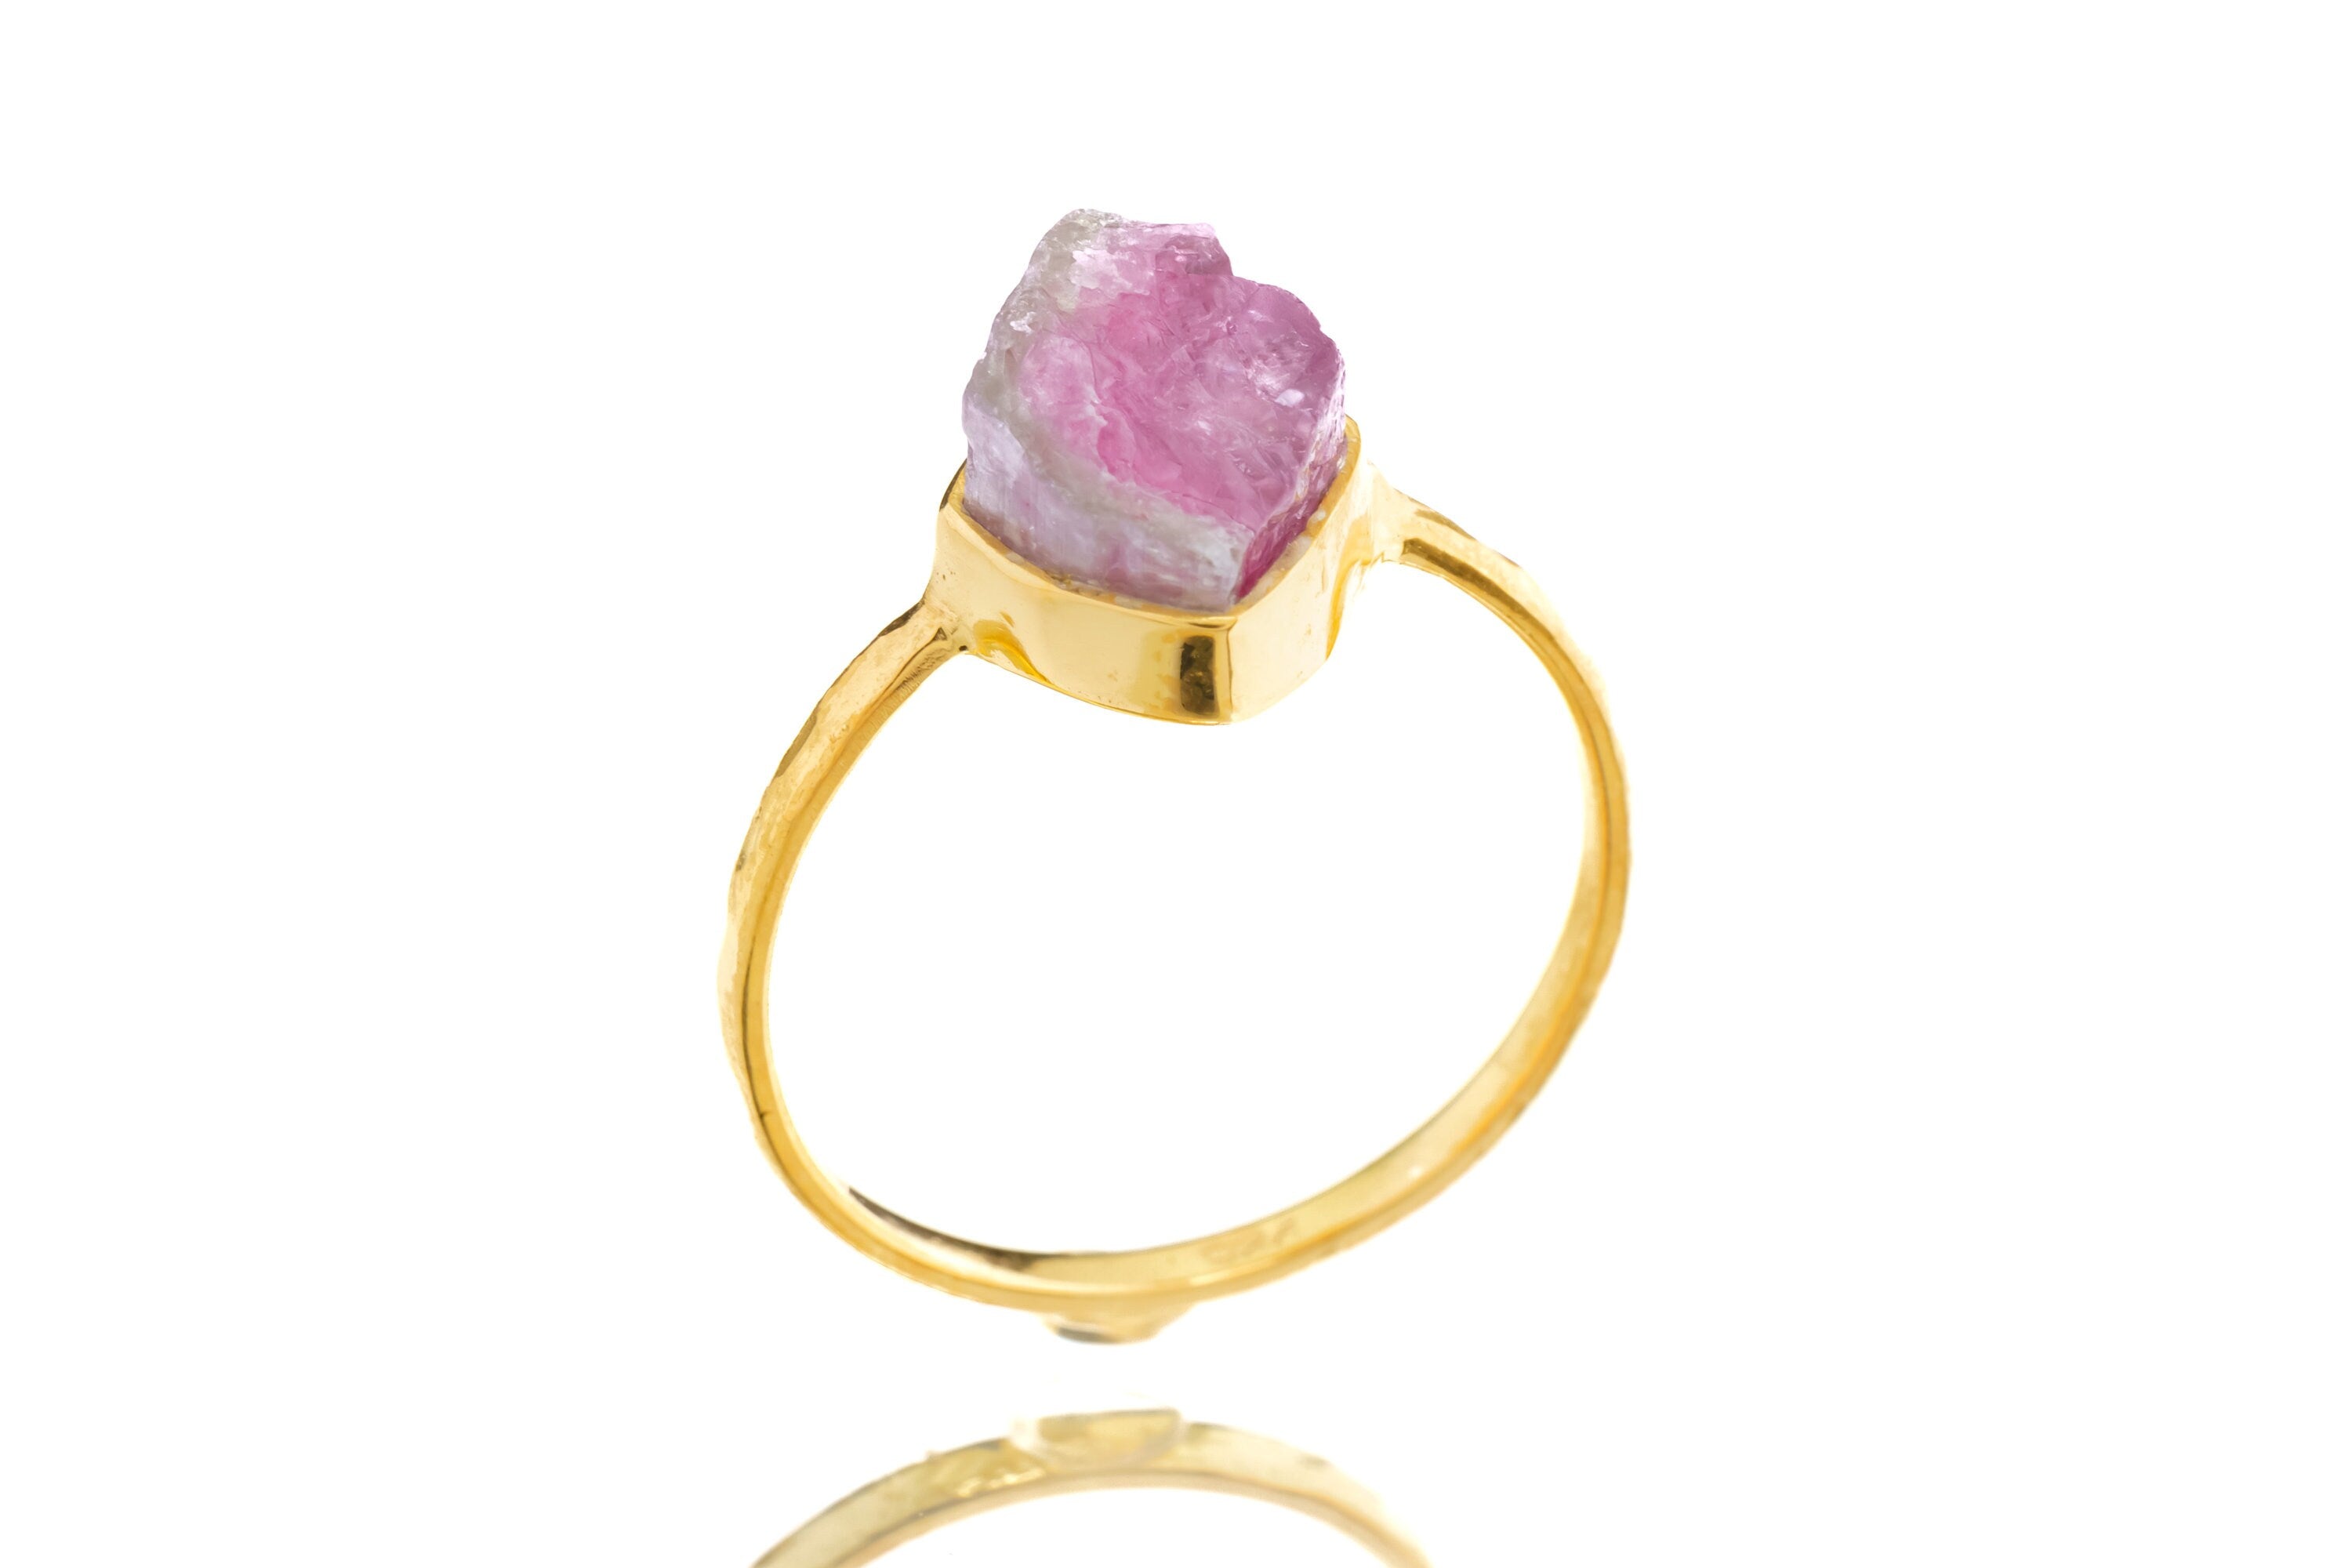 Mostly Pink Watermelon Tourmaline - Size 6 US - Gold Plated 925 Sterling Silver - Thin Band Hammer Textured